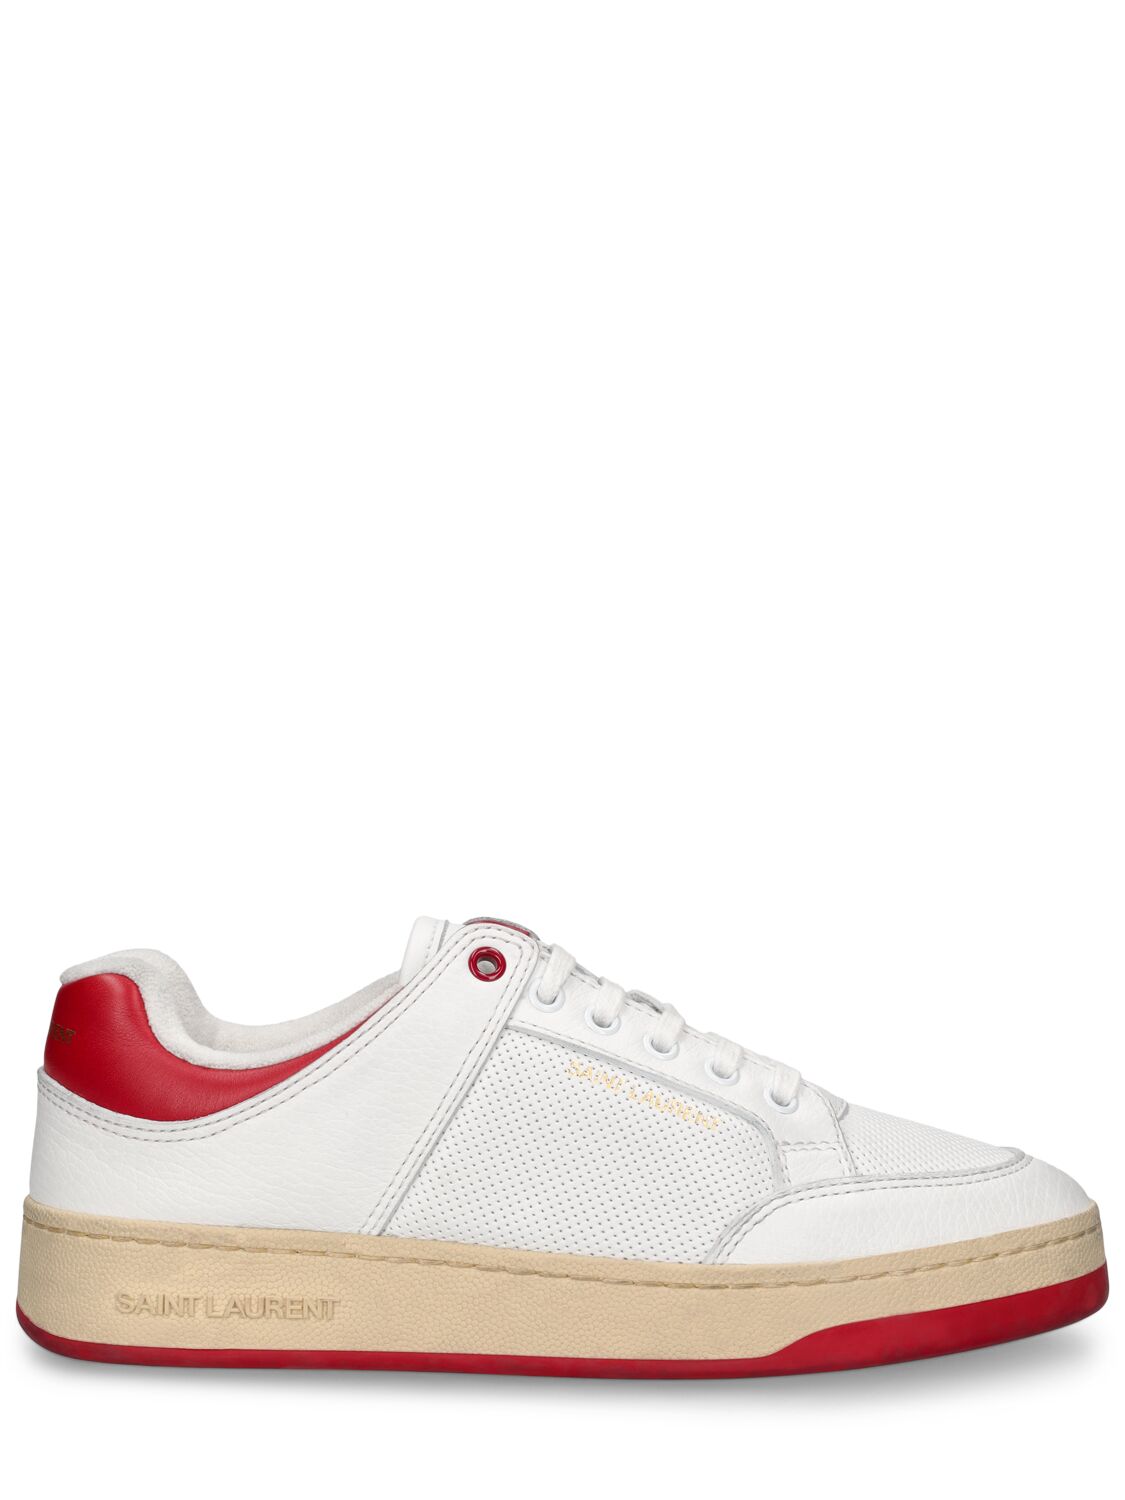 Saint Laurent 20mm Sl61 Leather Sneakers In White